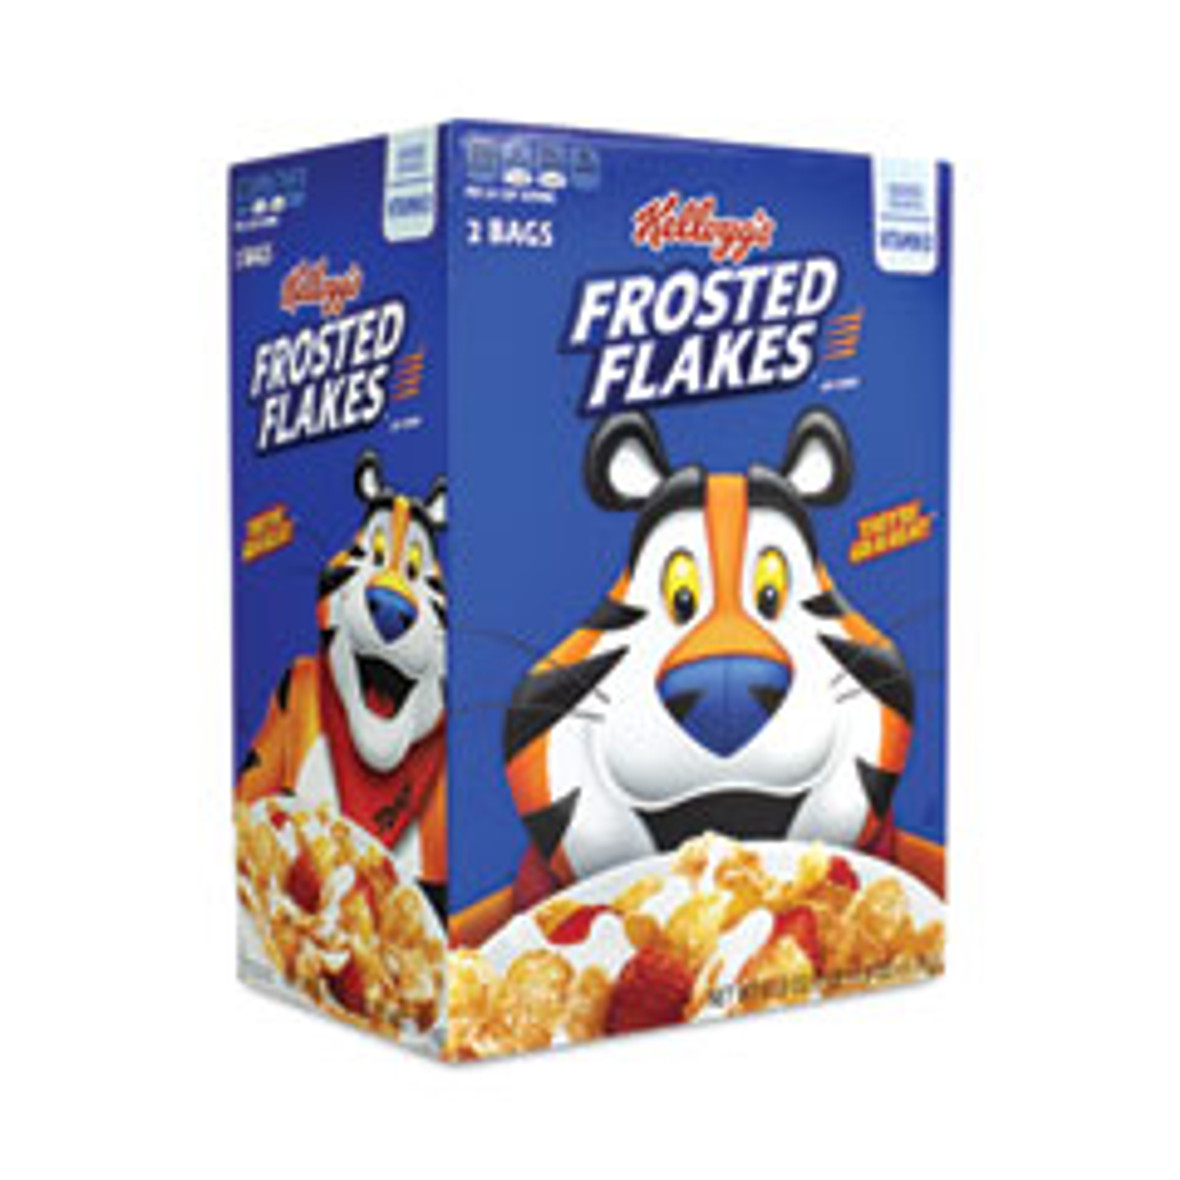 Kellogg's Frosted Flakes Breakfast Cereal, 61.9 Oz Bag, 2 Bags/box